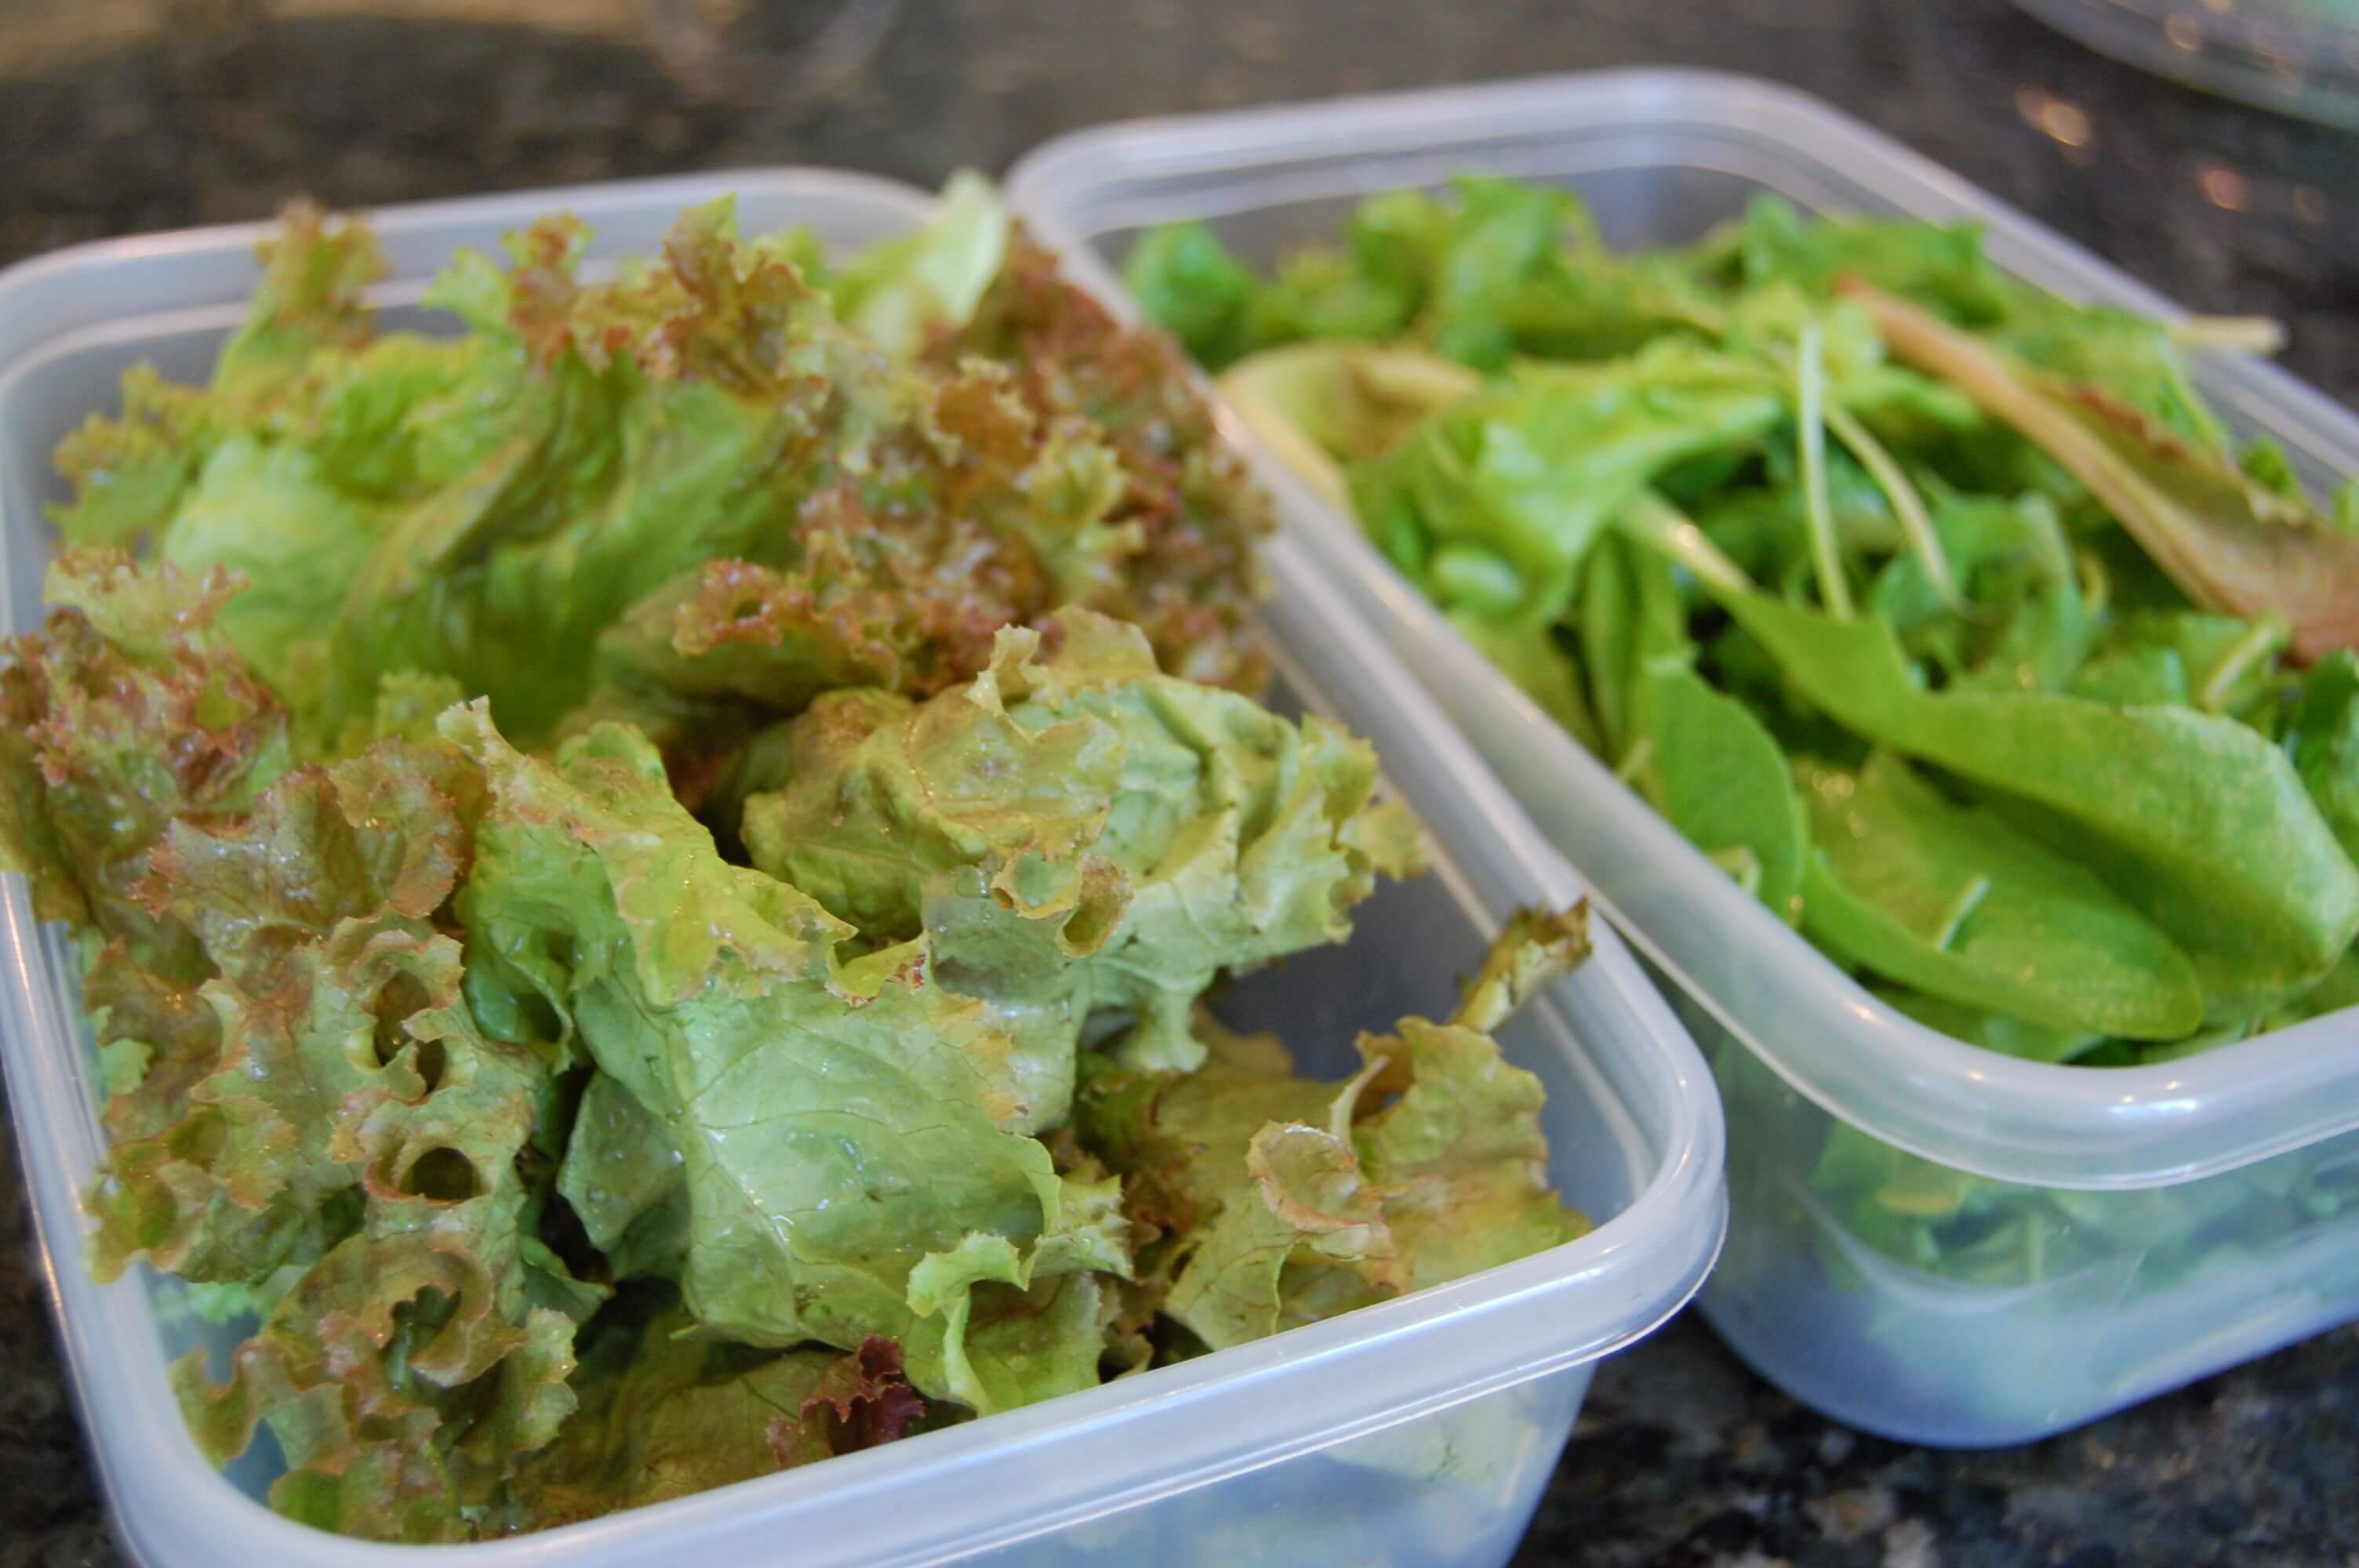 Two plastic containers with mixed greens on a counter. 